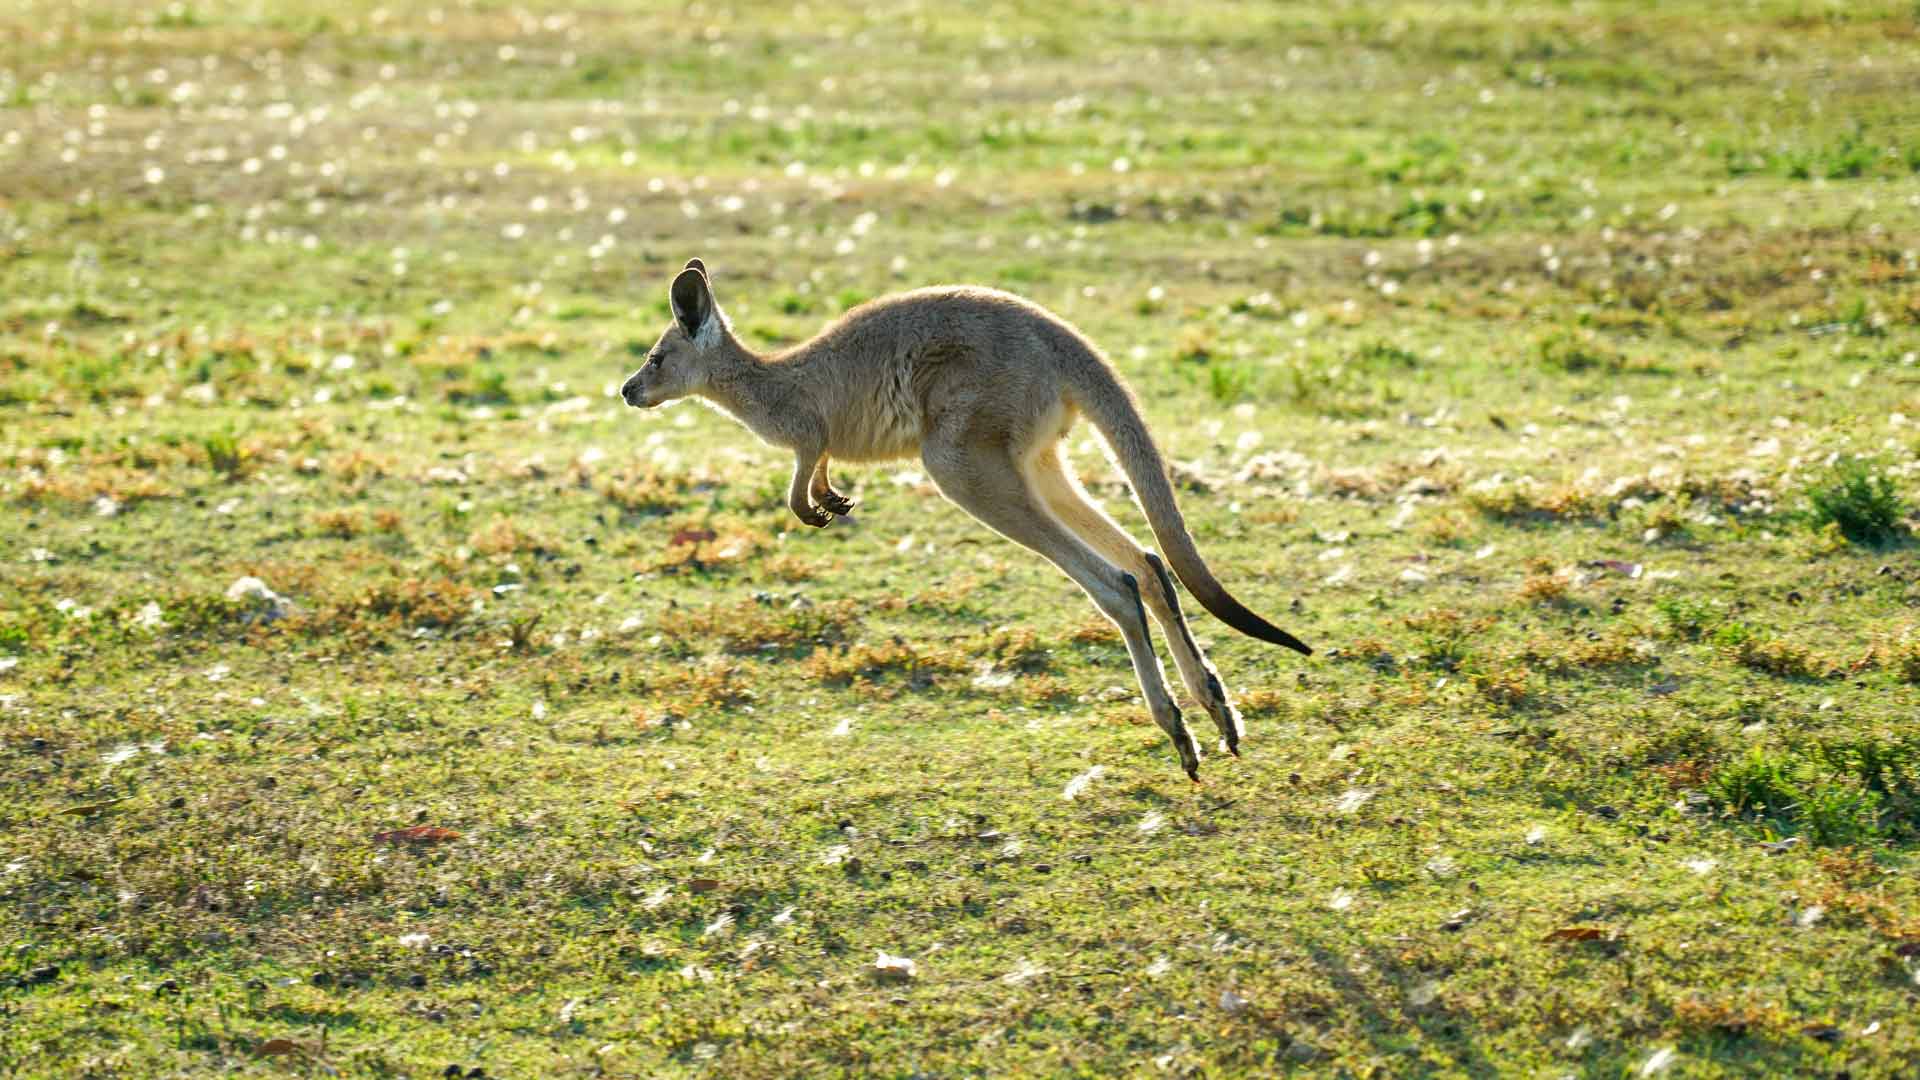 A Kangaroo Has Been Videoed Hopping Through Adelaide in More Proof the Animals Are Taking Over